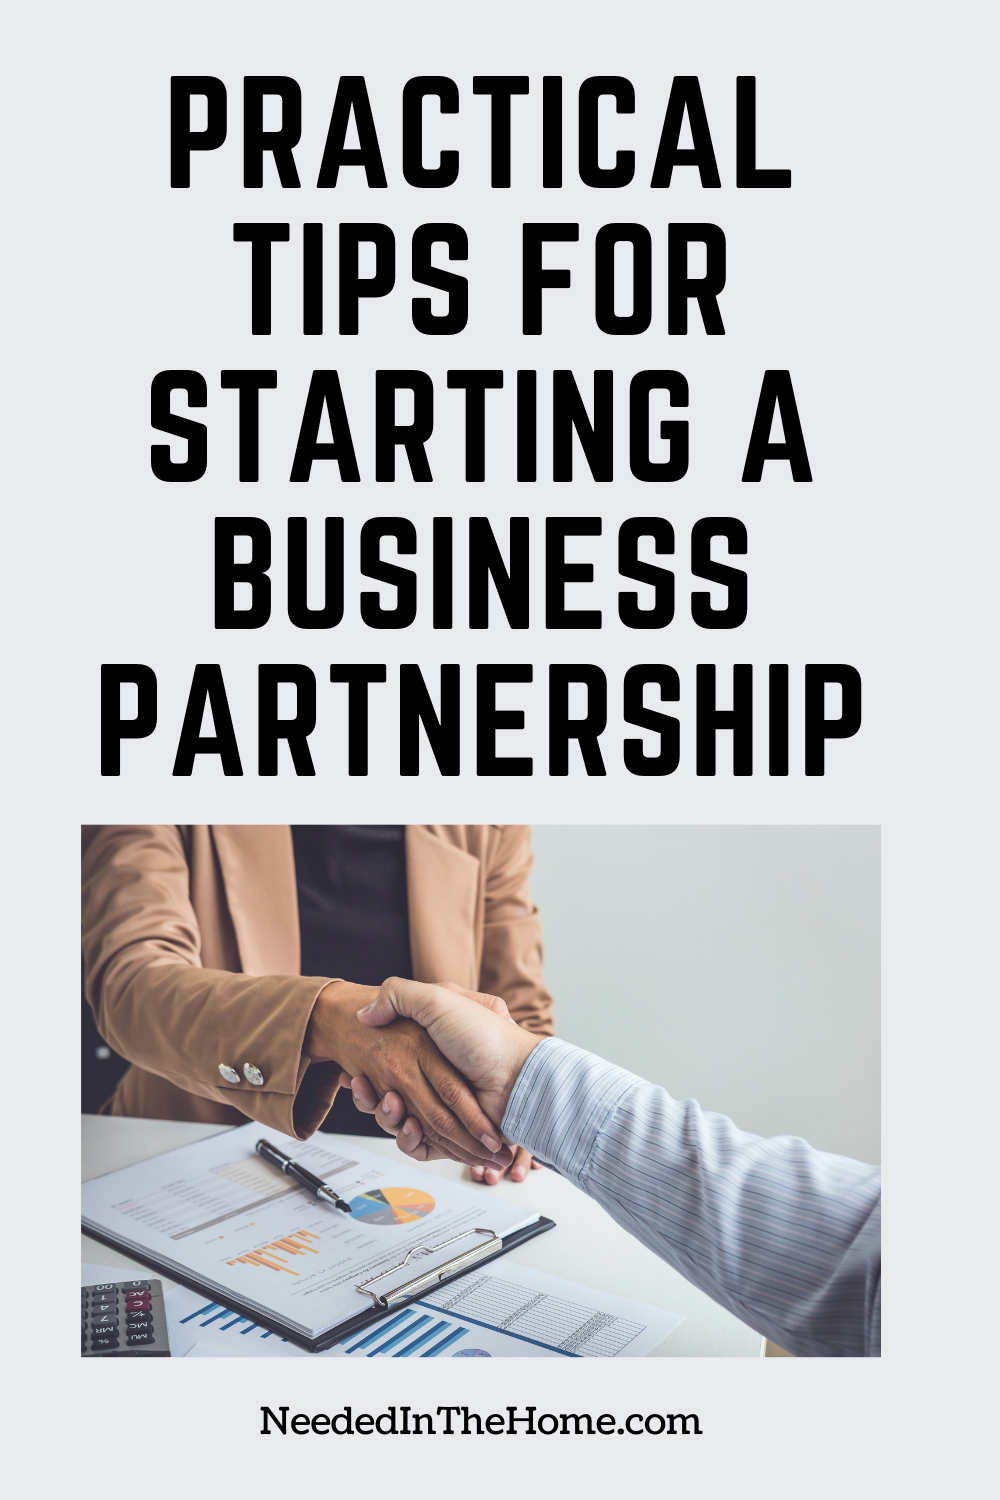 pinterest-pin-description practical tips for starting a business partnership shaking hands business contract neededinthehome